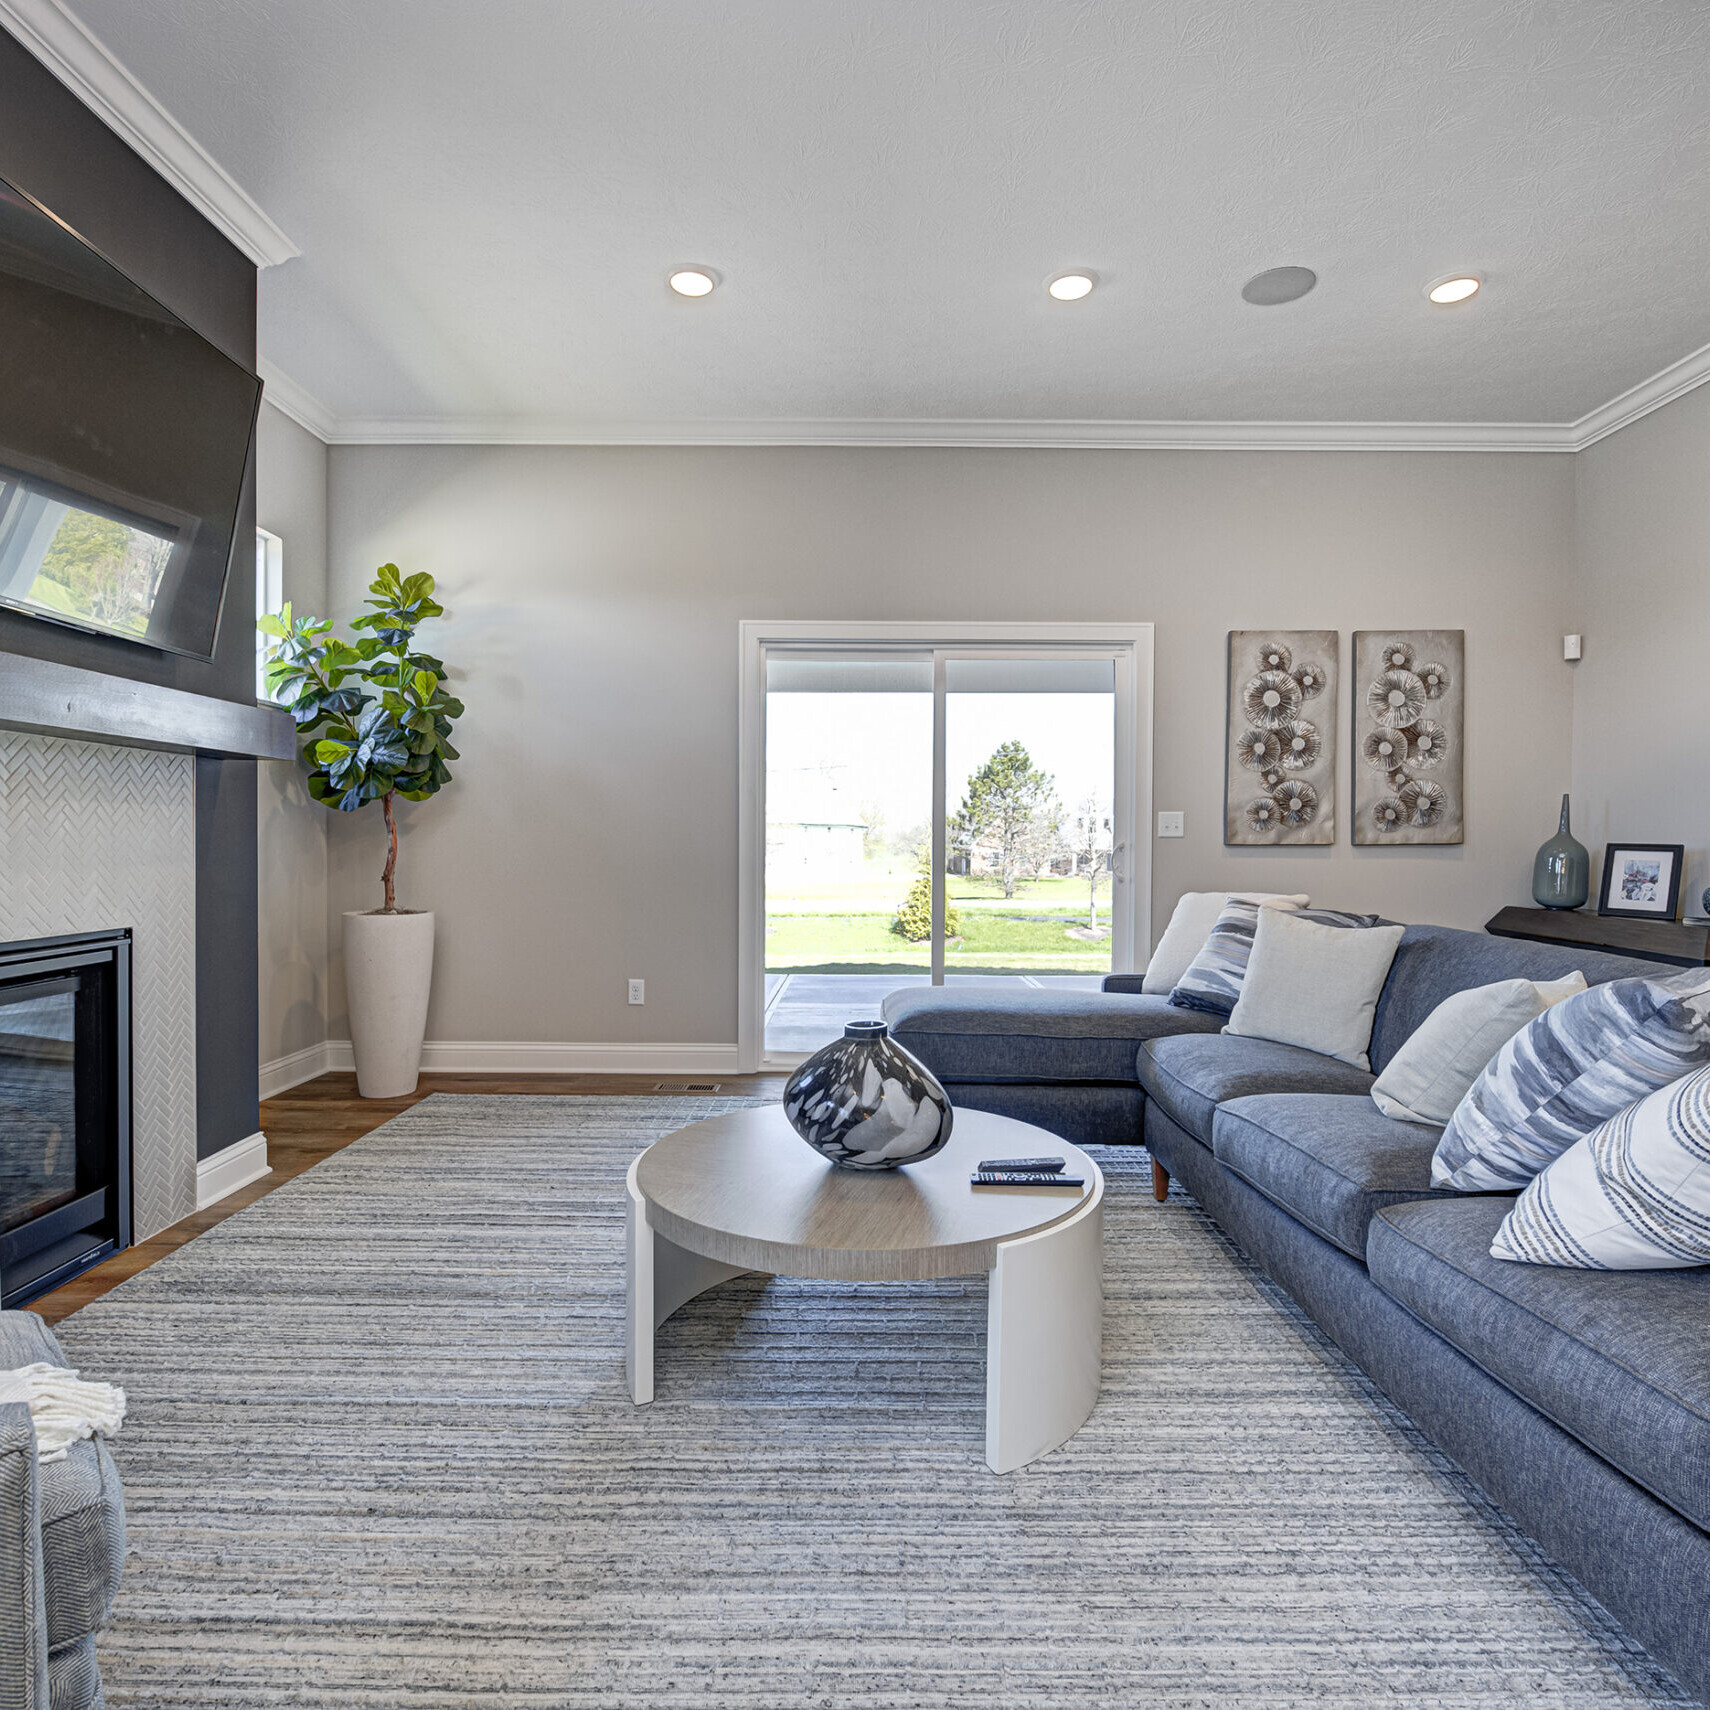 A living room with a gray couch and TV in a Custom Home Builder Fishers Indiana.